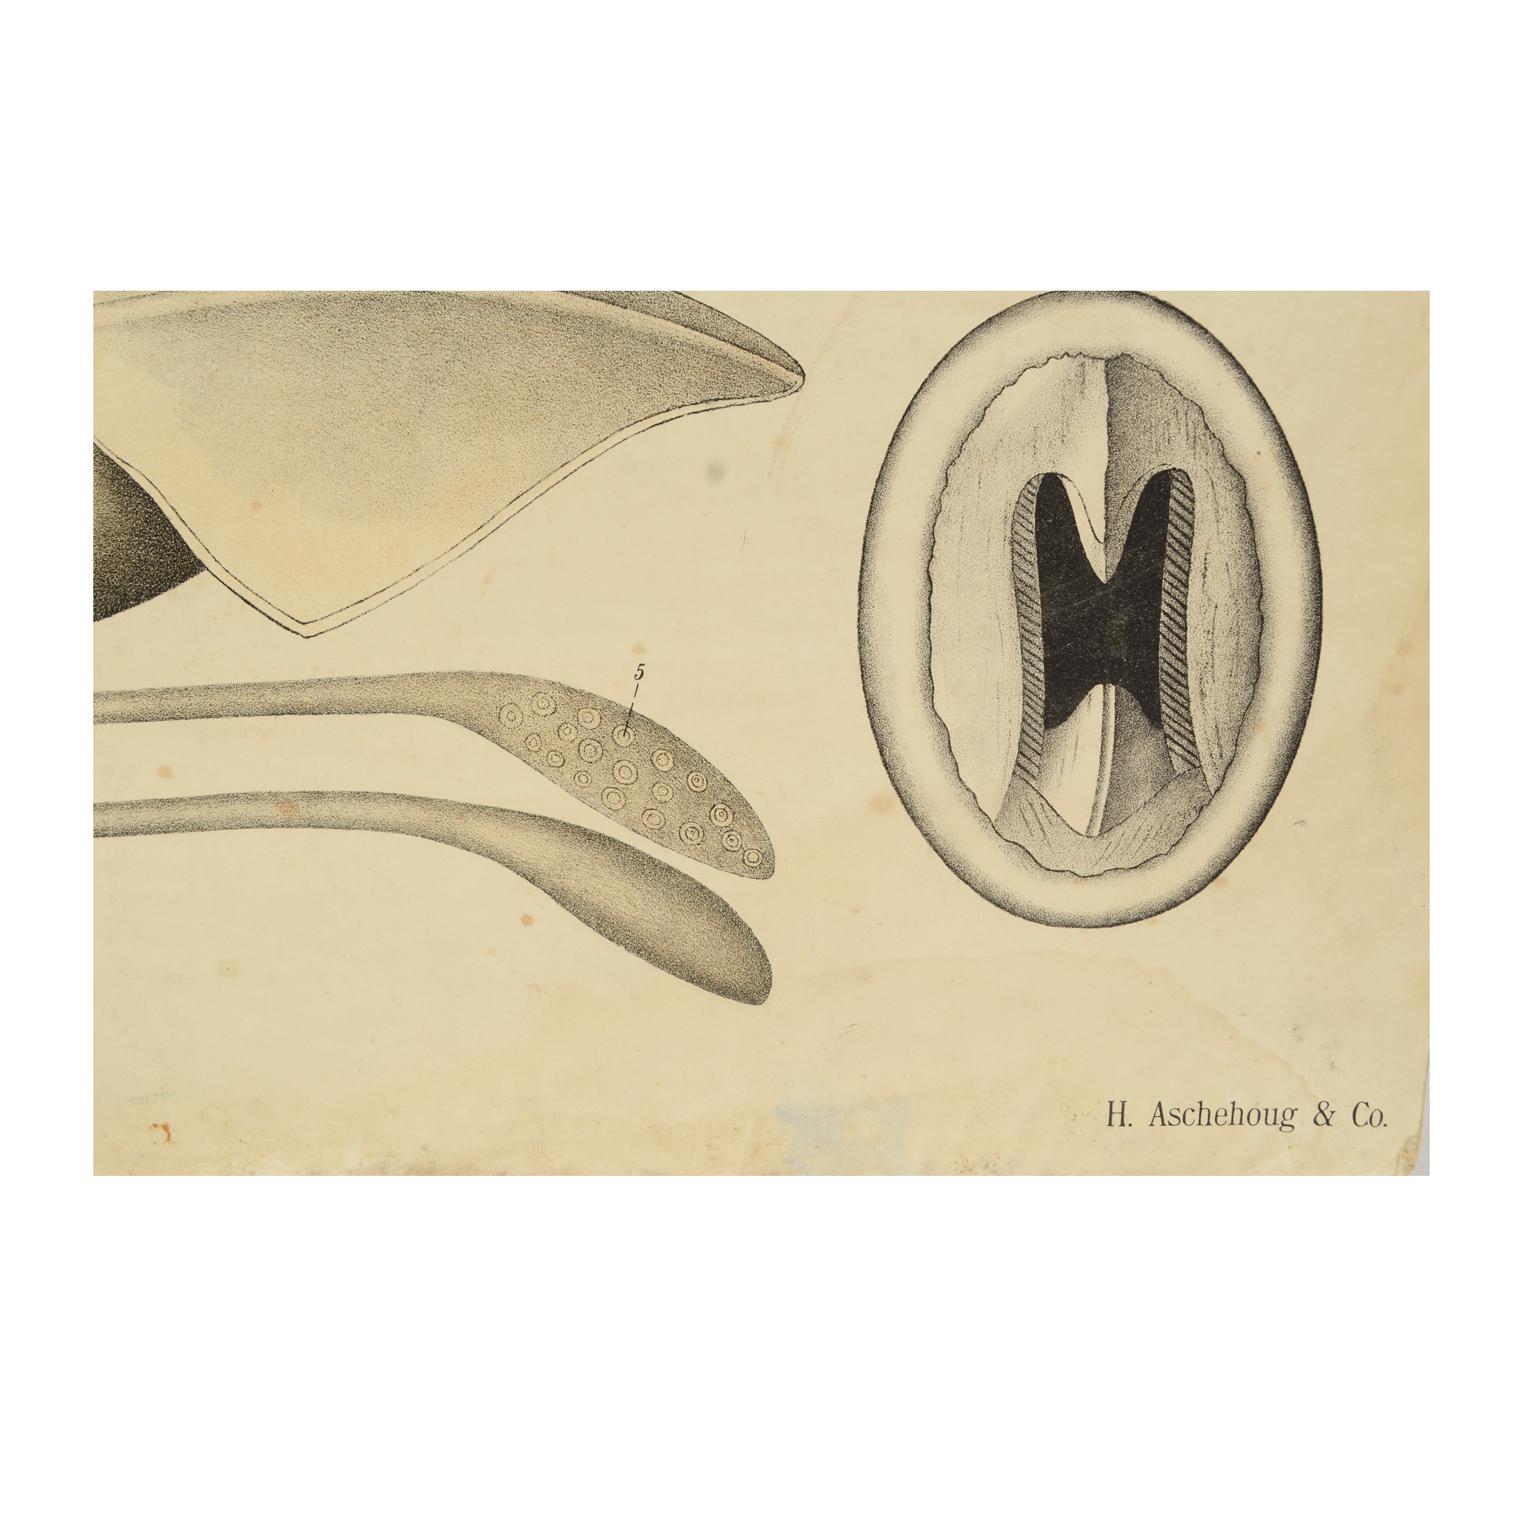 Zoological Lithograph of molluscs 1925 on Cardboard by H Aschehoug & Co, Norway For Sale 2